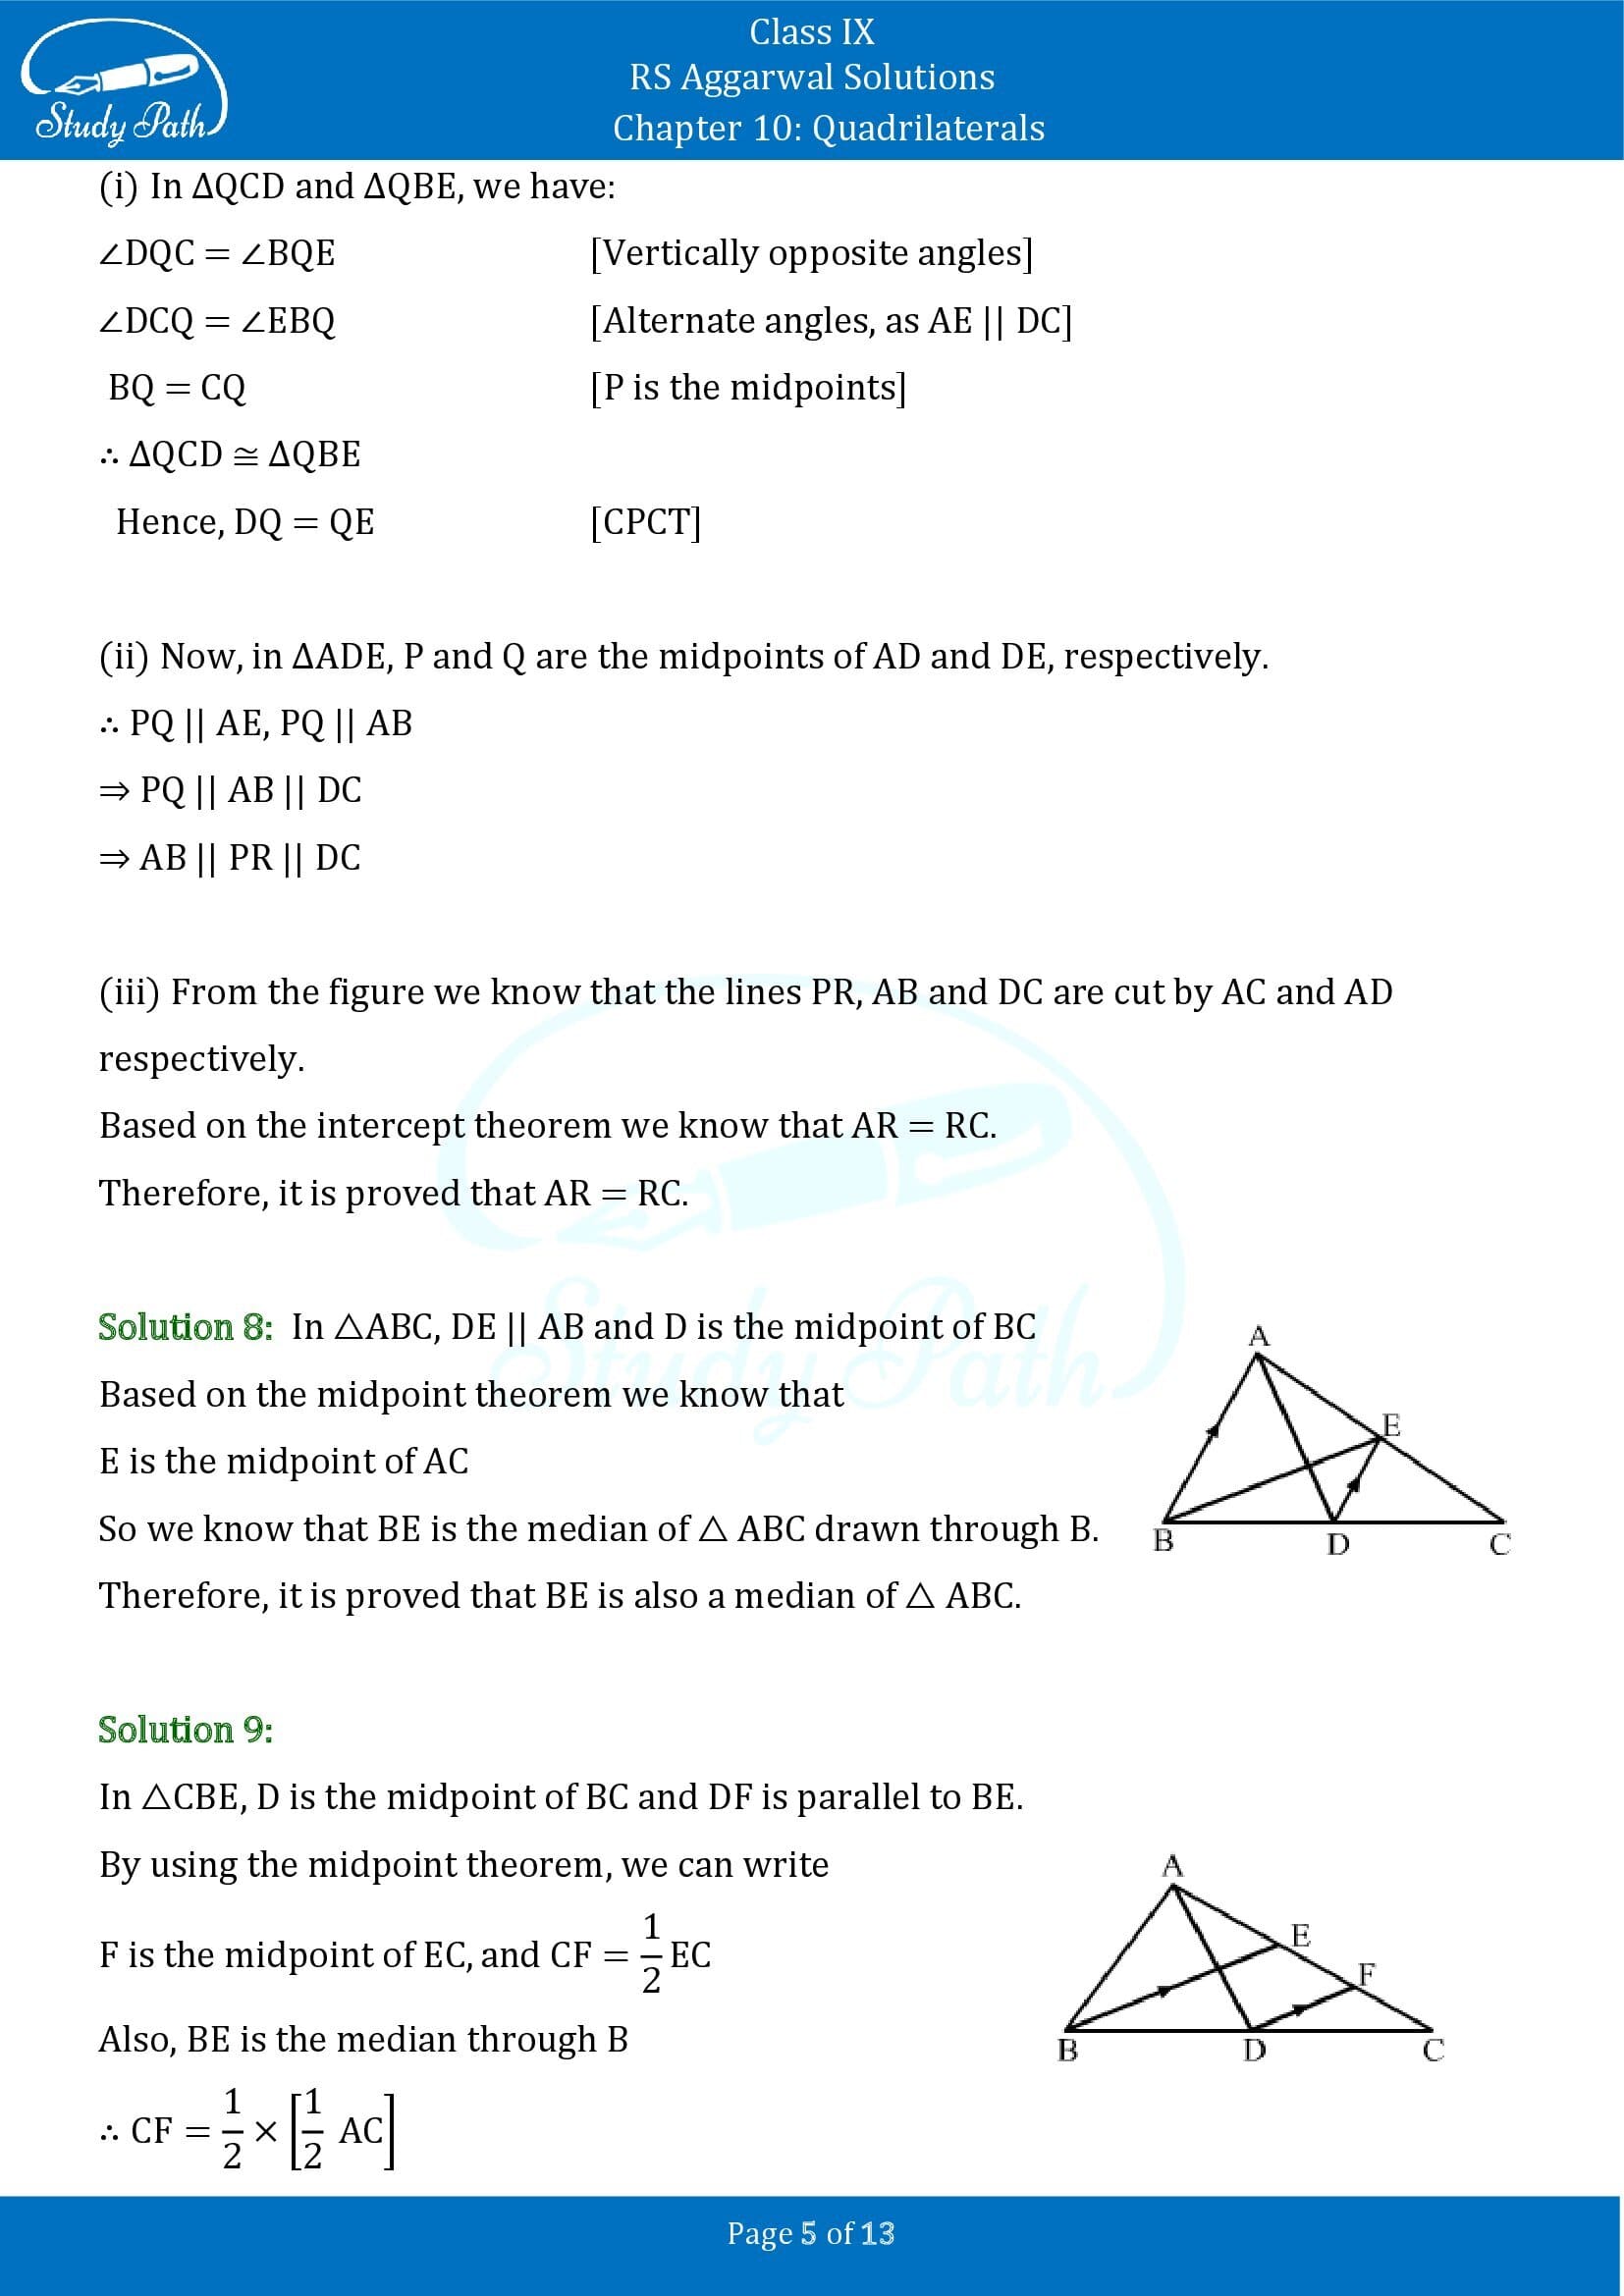 RS Aggarwal Solutions Class 9 Chapter 10 Quadrilaterals Exercise 10C 00005